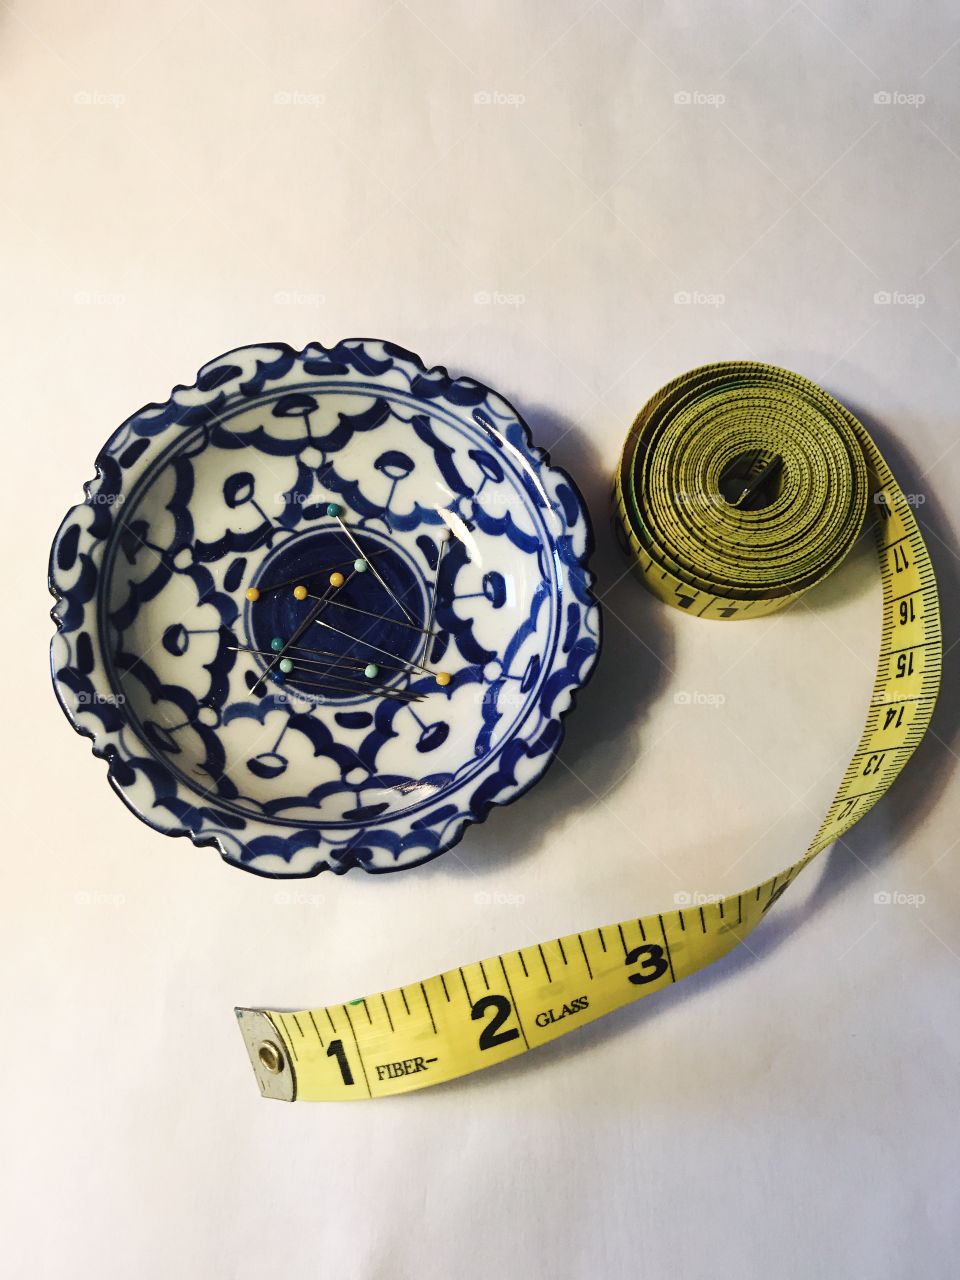 Pins and measuring tape